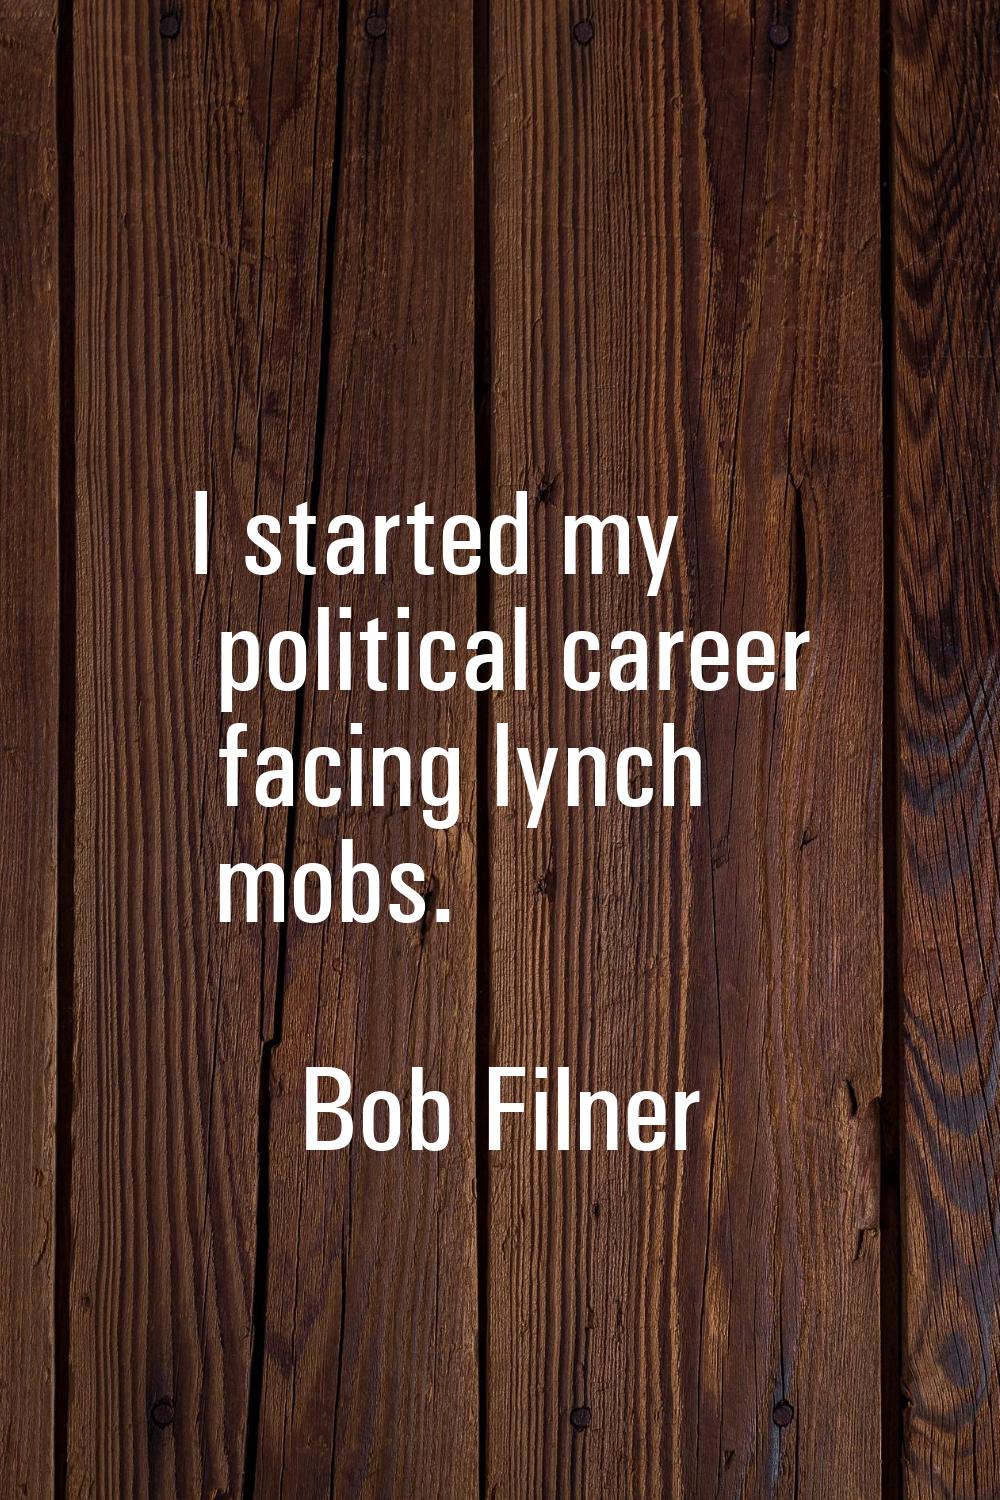 I started my political career facing lynch mobs.